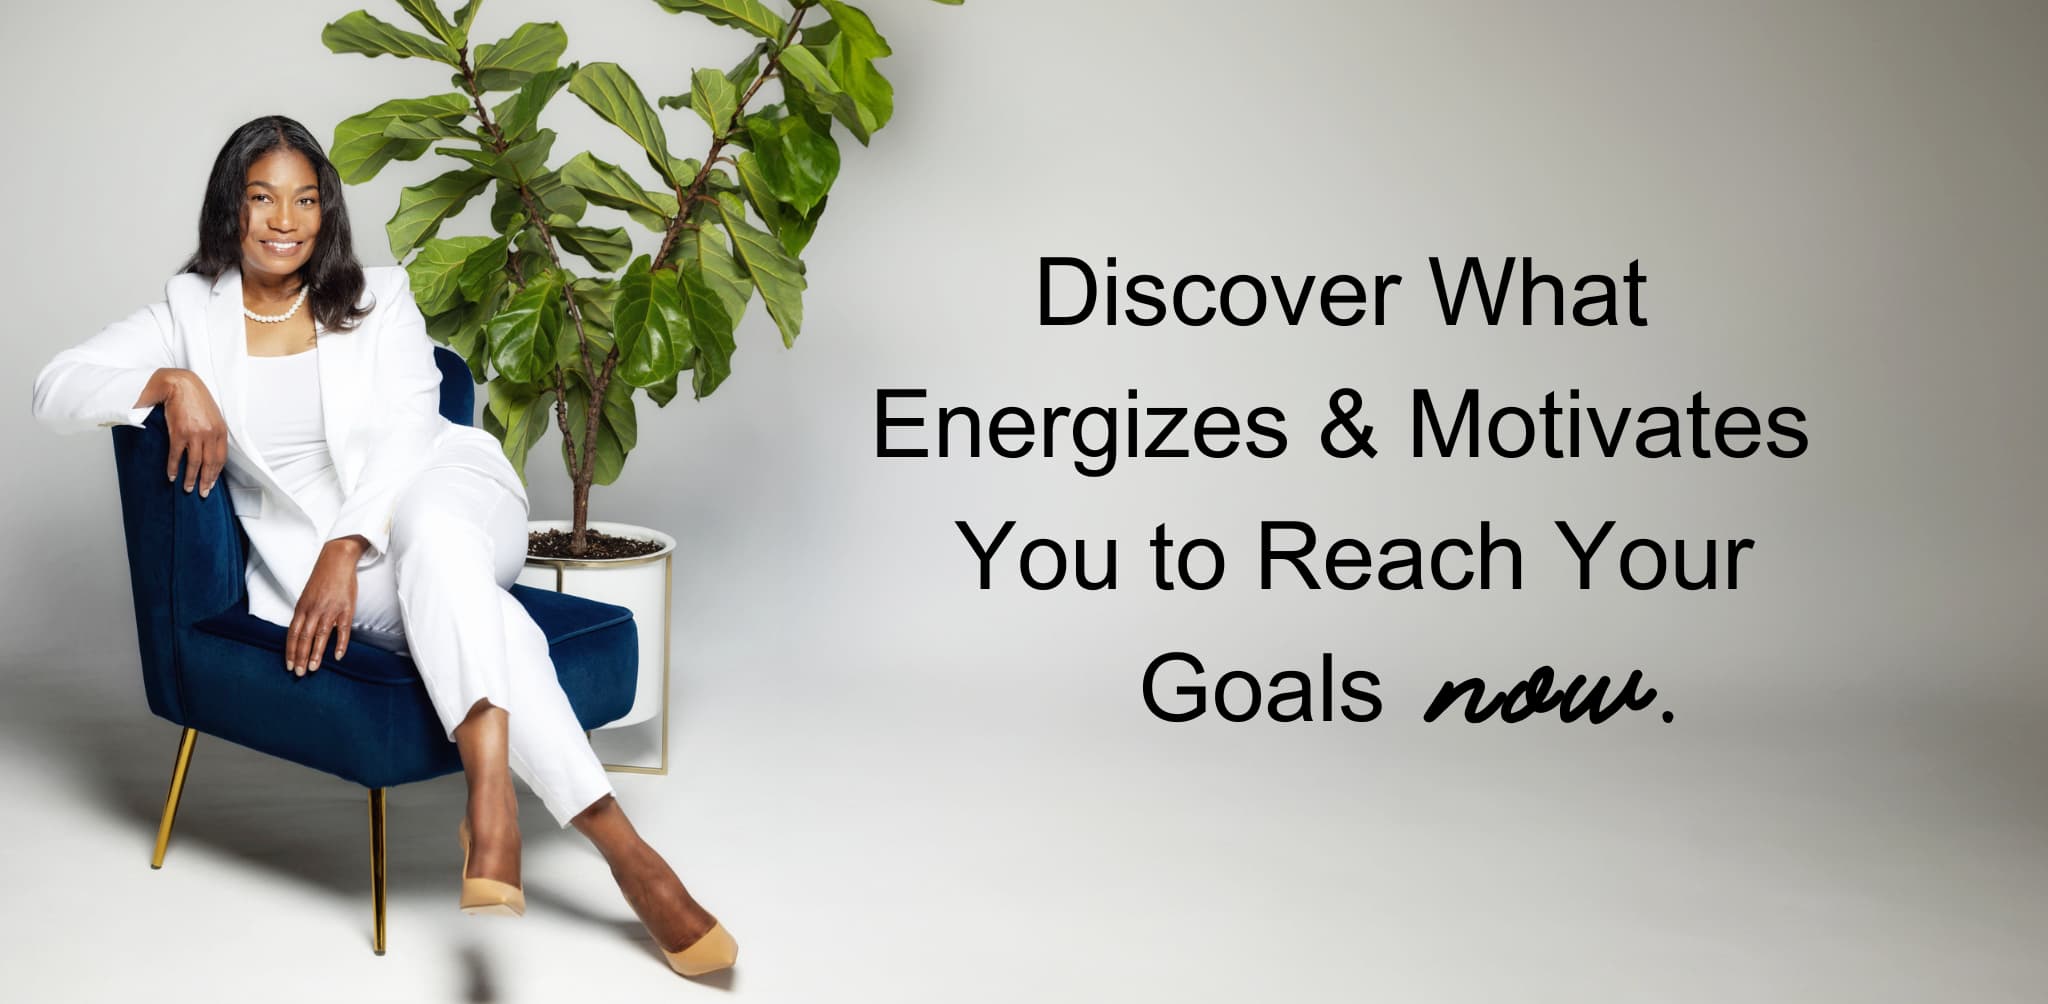 Discover what energizes and motivates you to reach your goals.